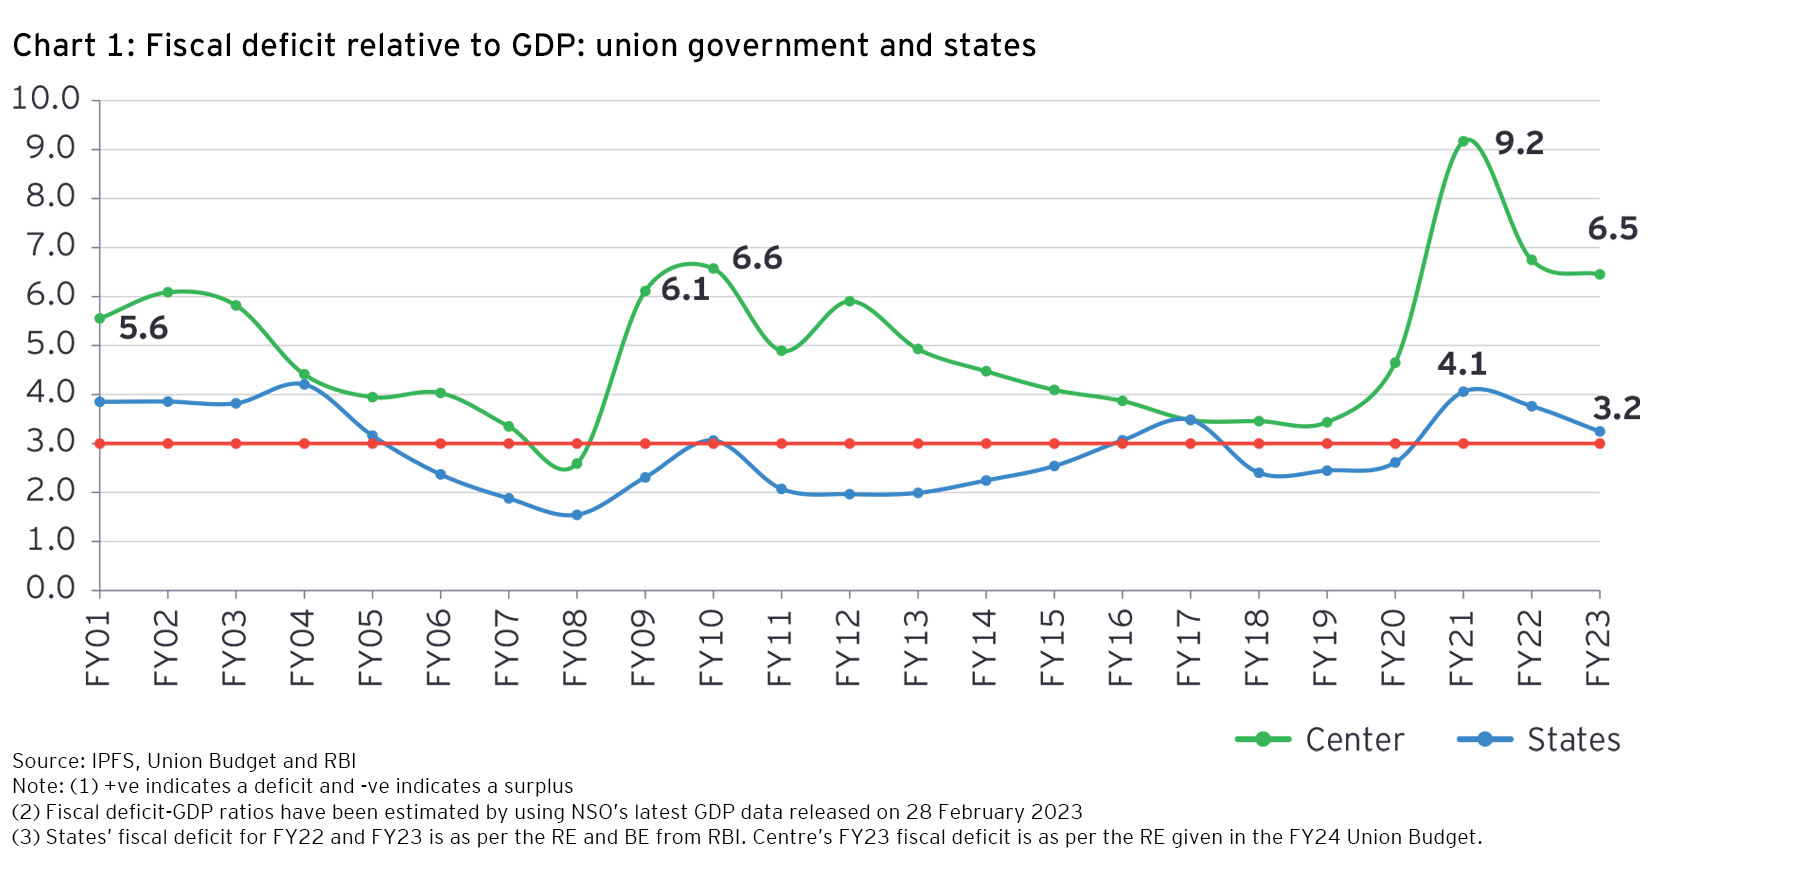 Fiscal deficit relative to GDP: union government and states